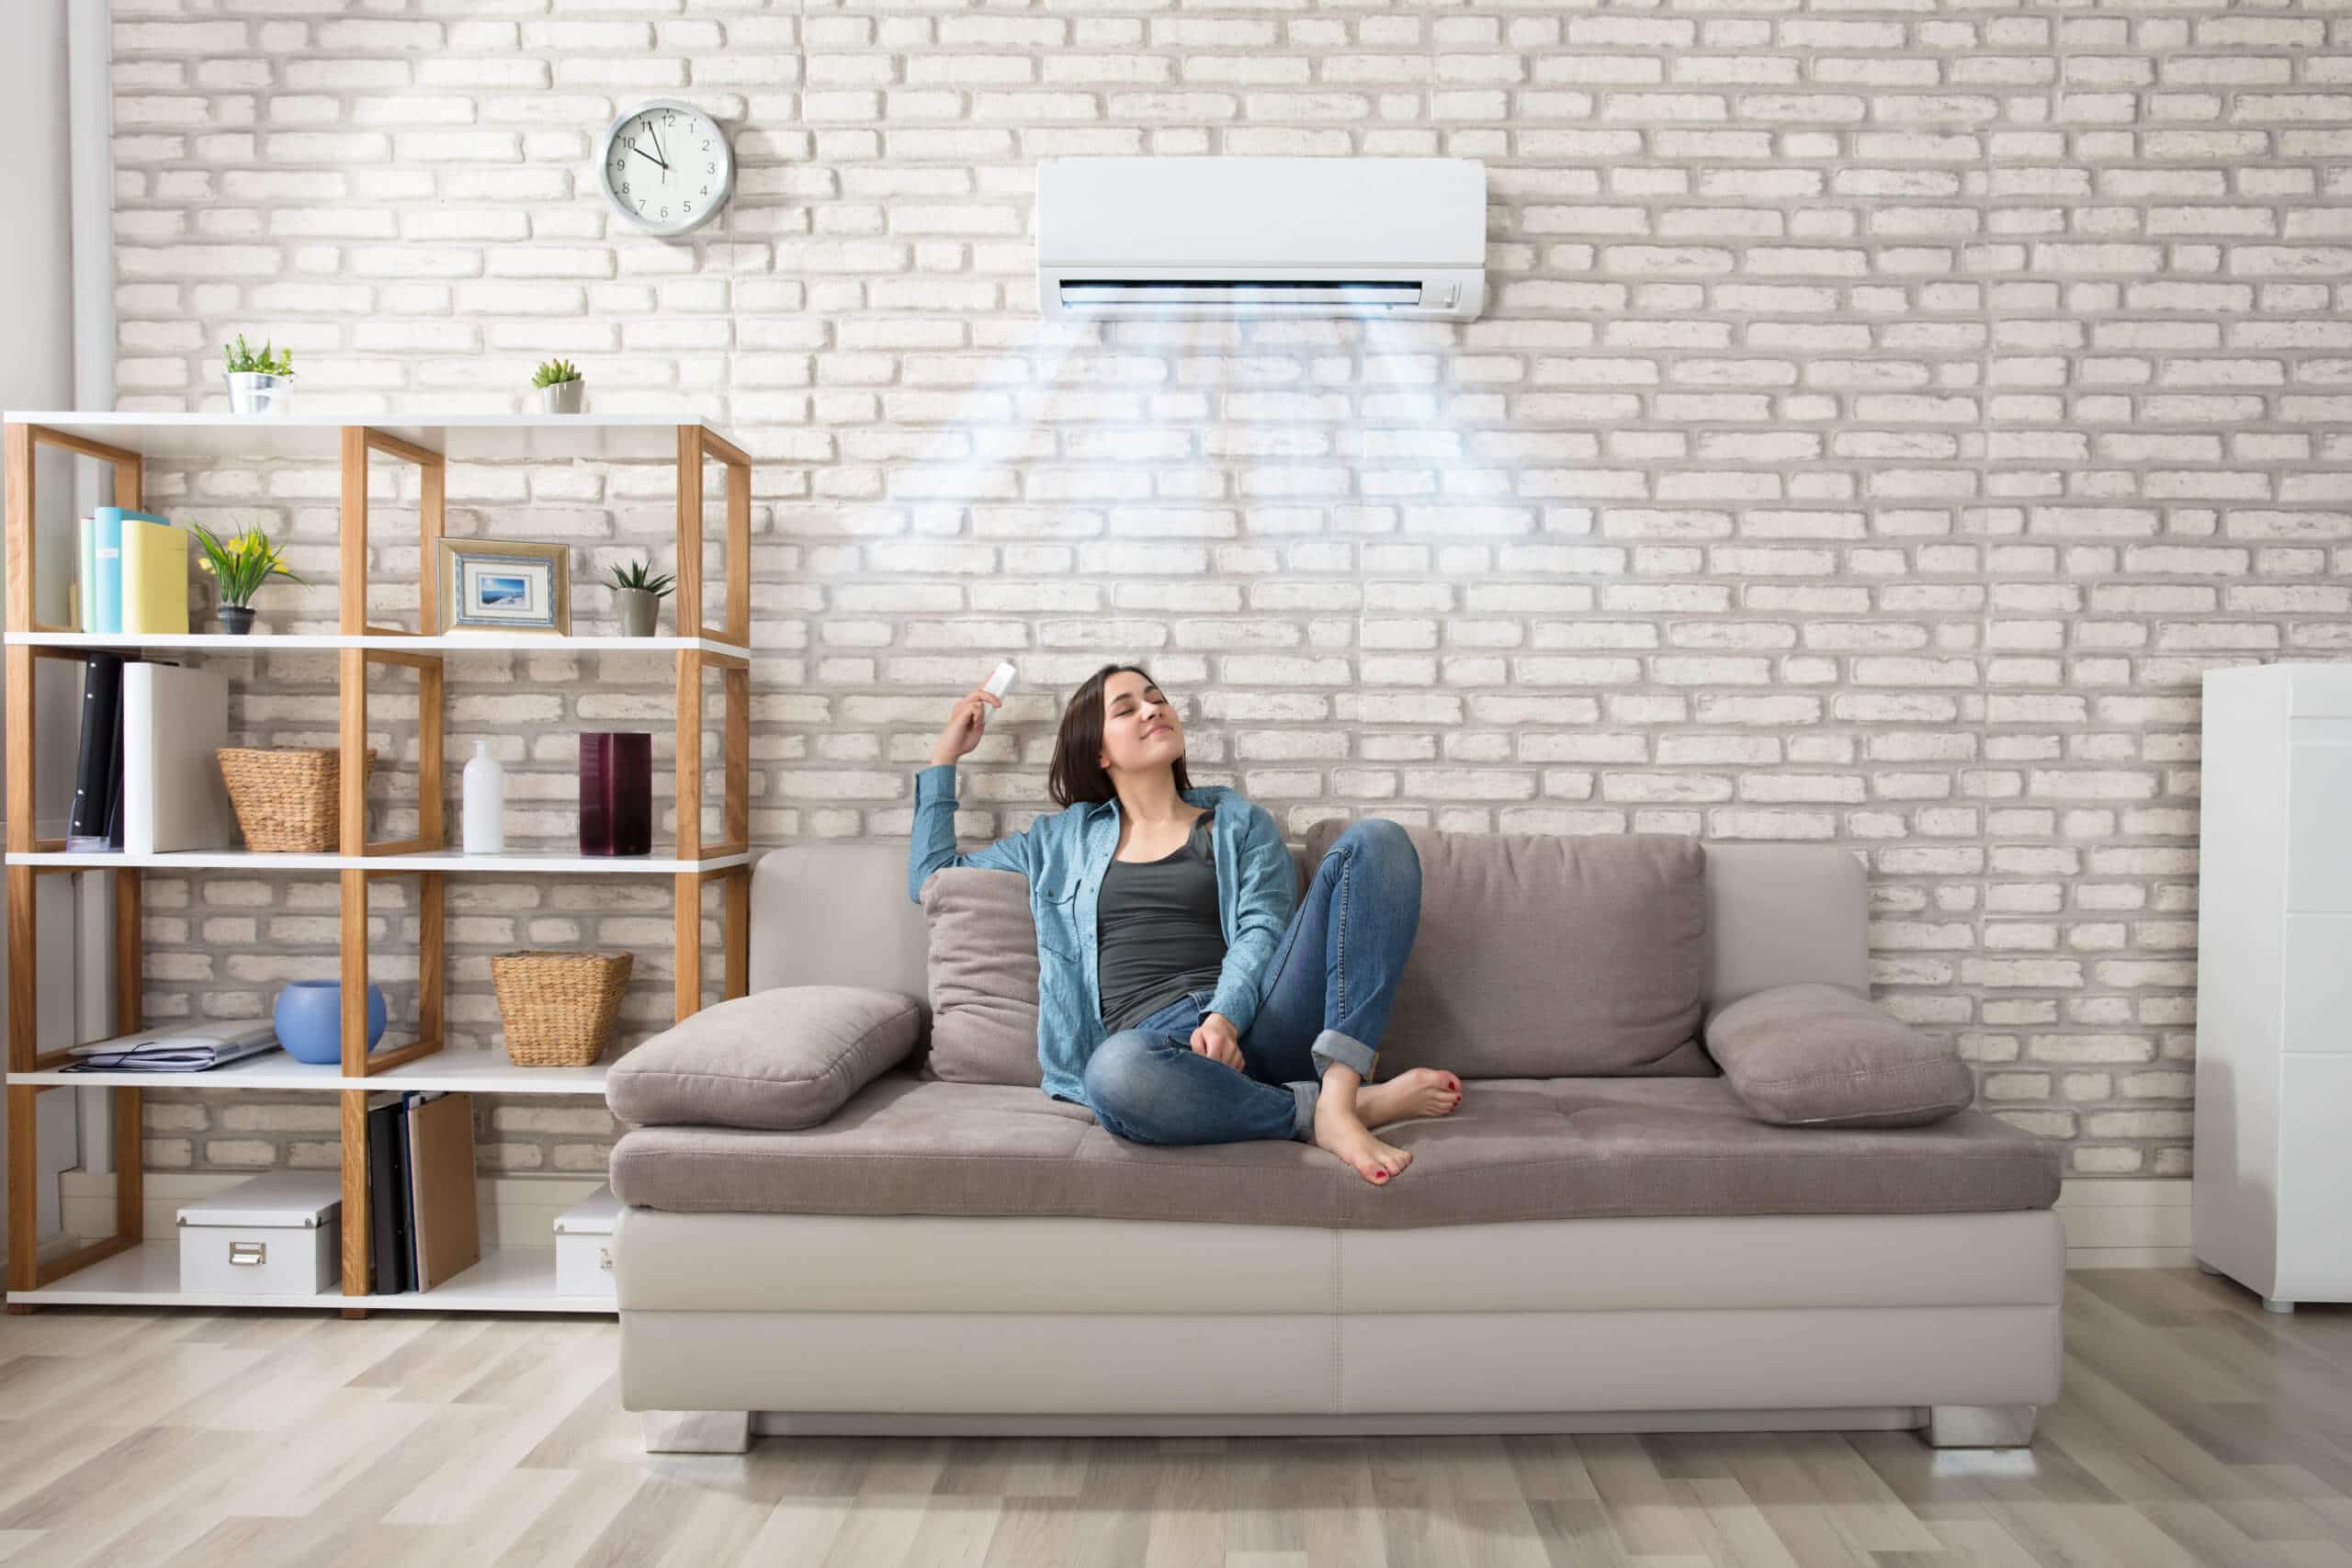 Get the Most Out of Your A/C with Energy Efficient Windows